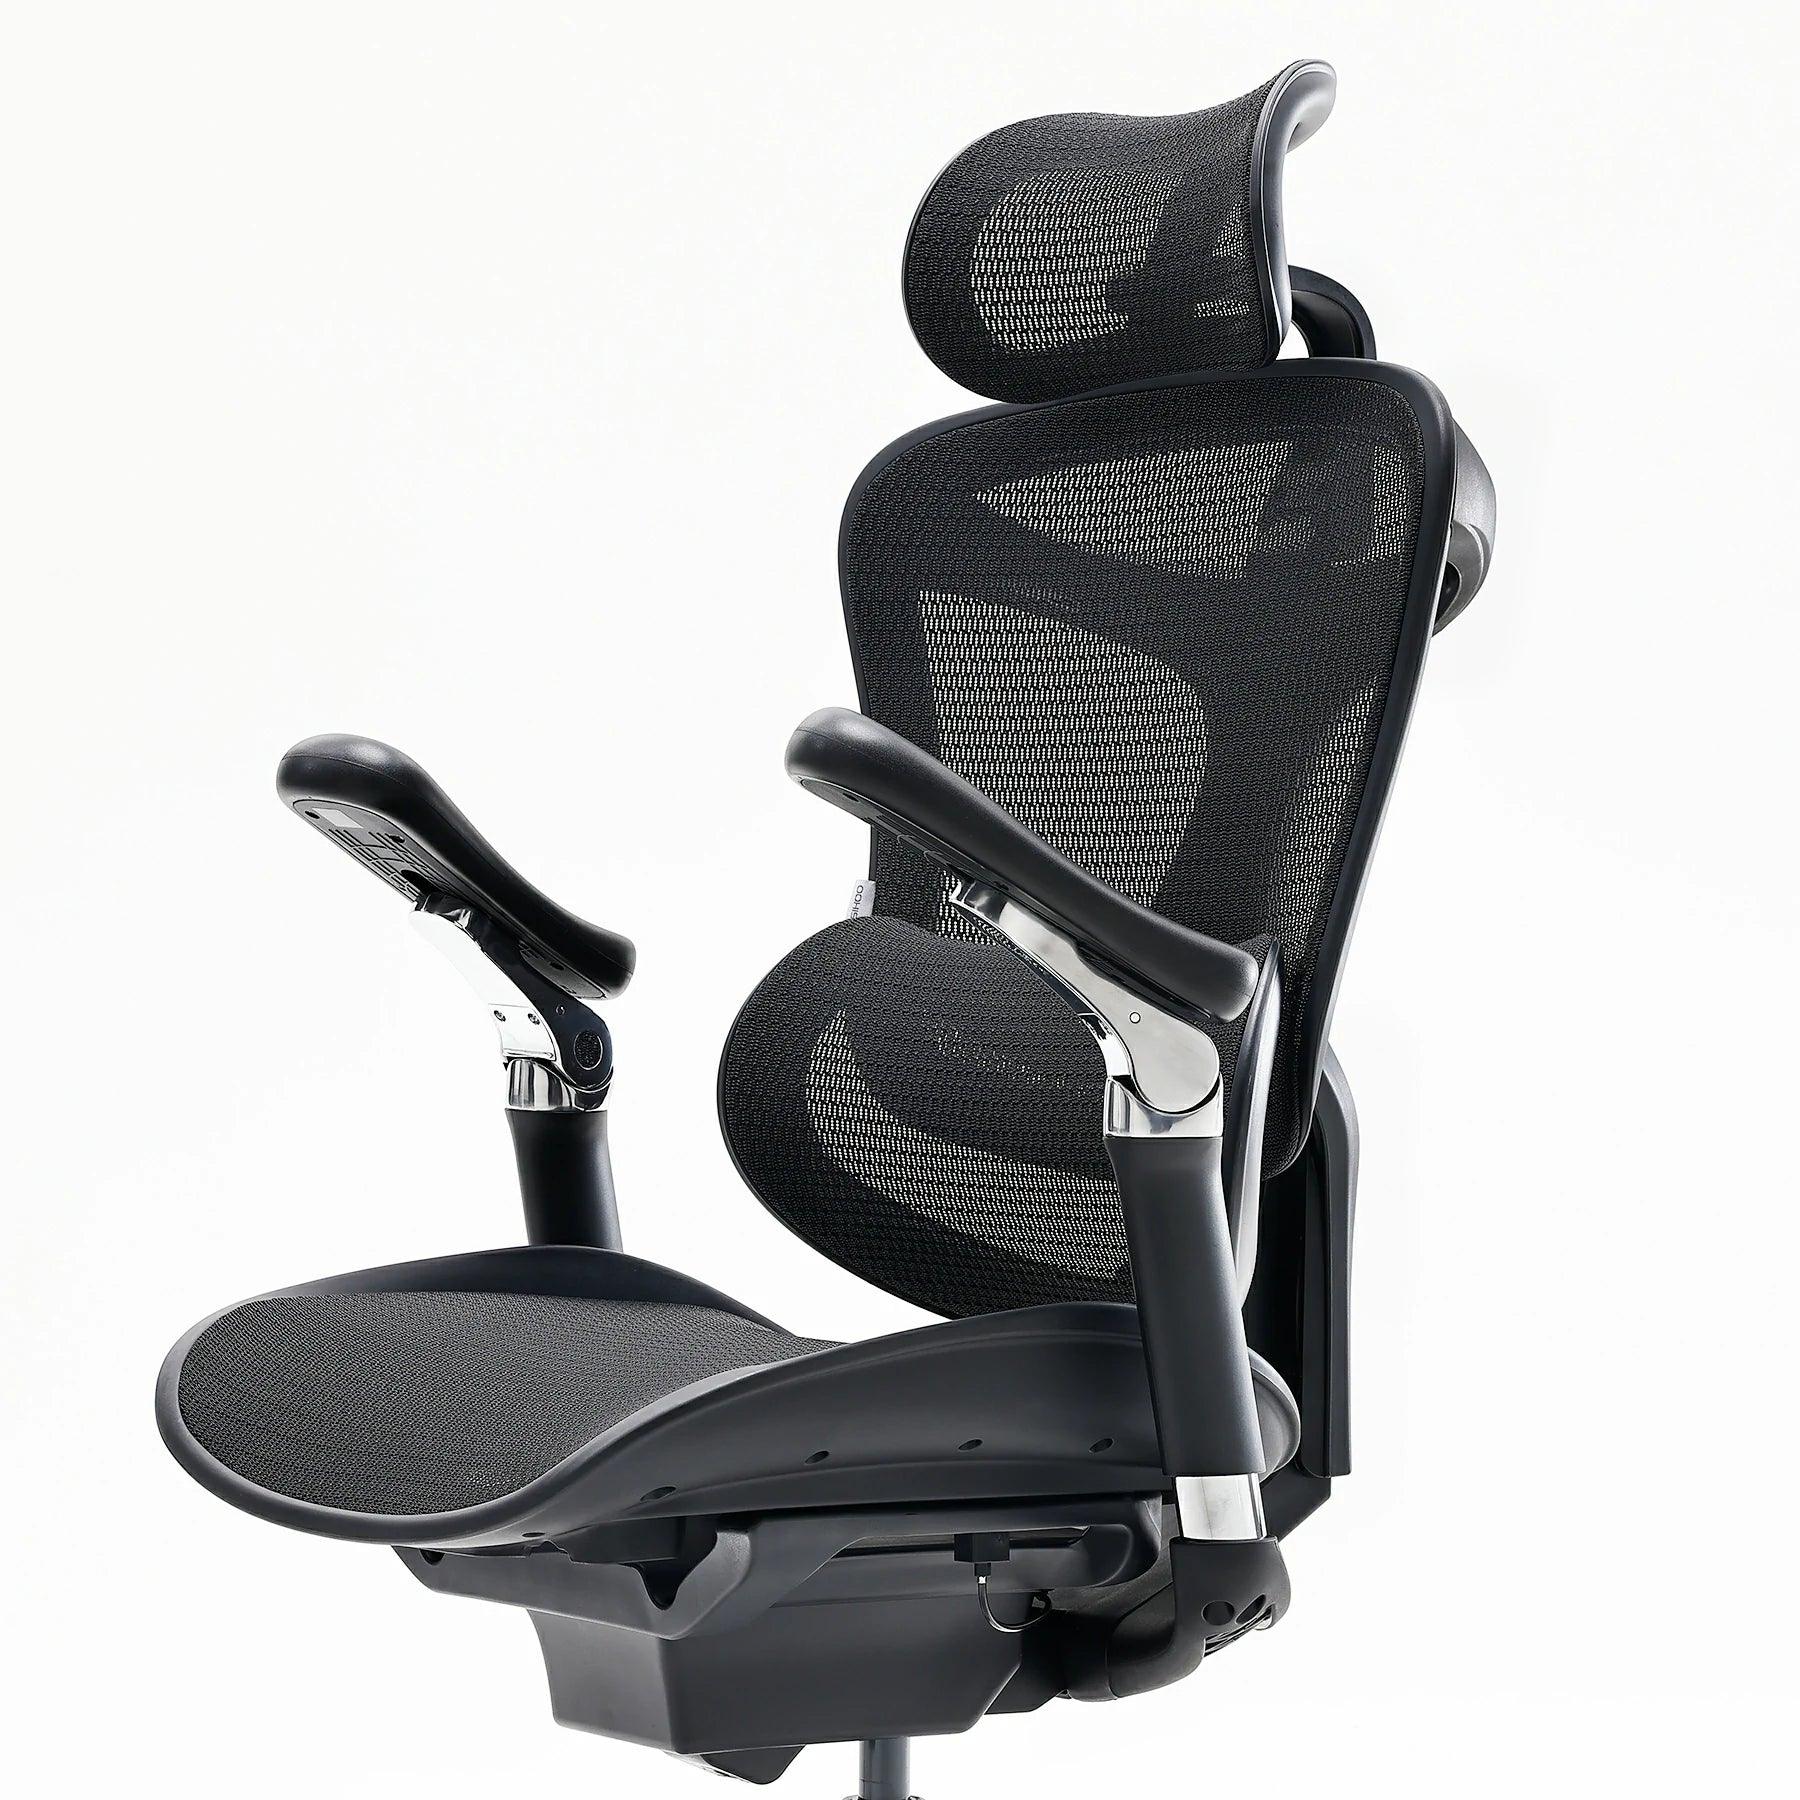 The 4 Best Office Chairs for 2023: Introducing Sihoo Doro C300, M57, M18,  and M76